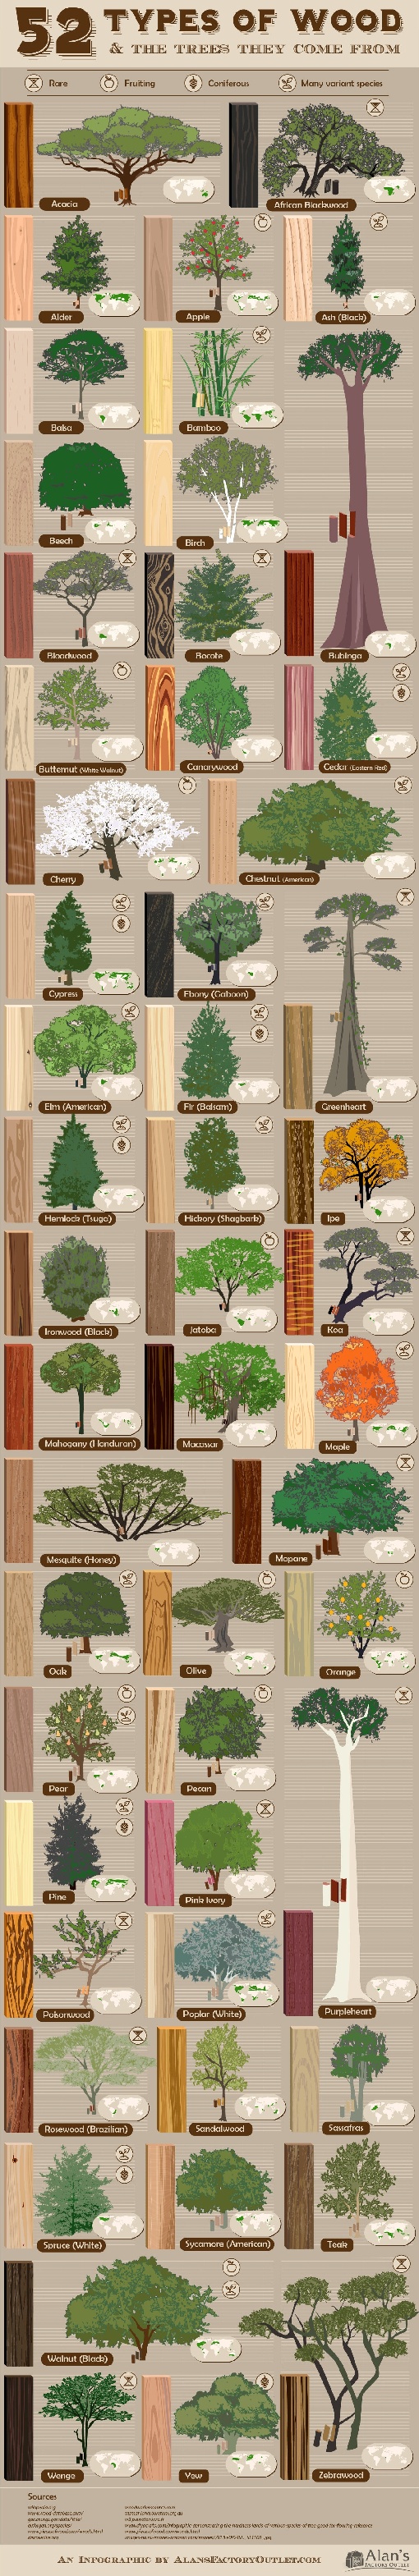 52-types-of-wood-trees-they-come-from.jpg